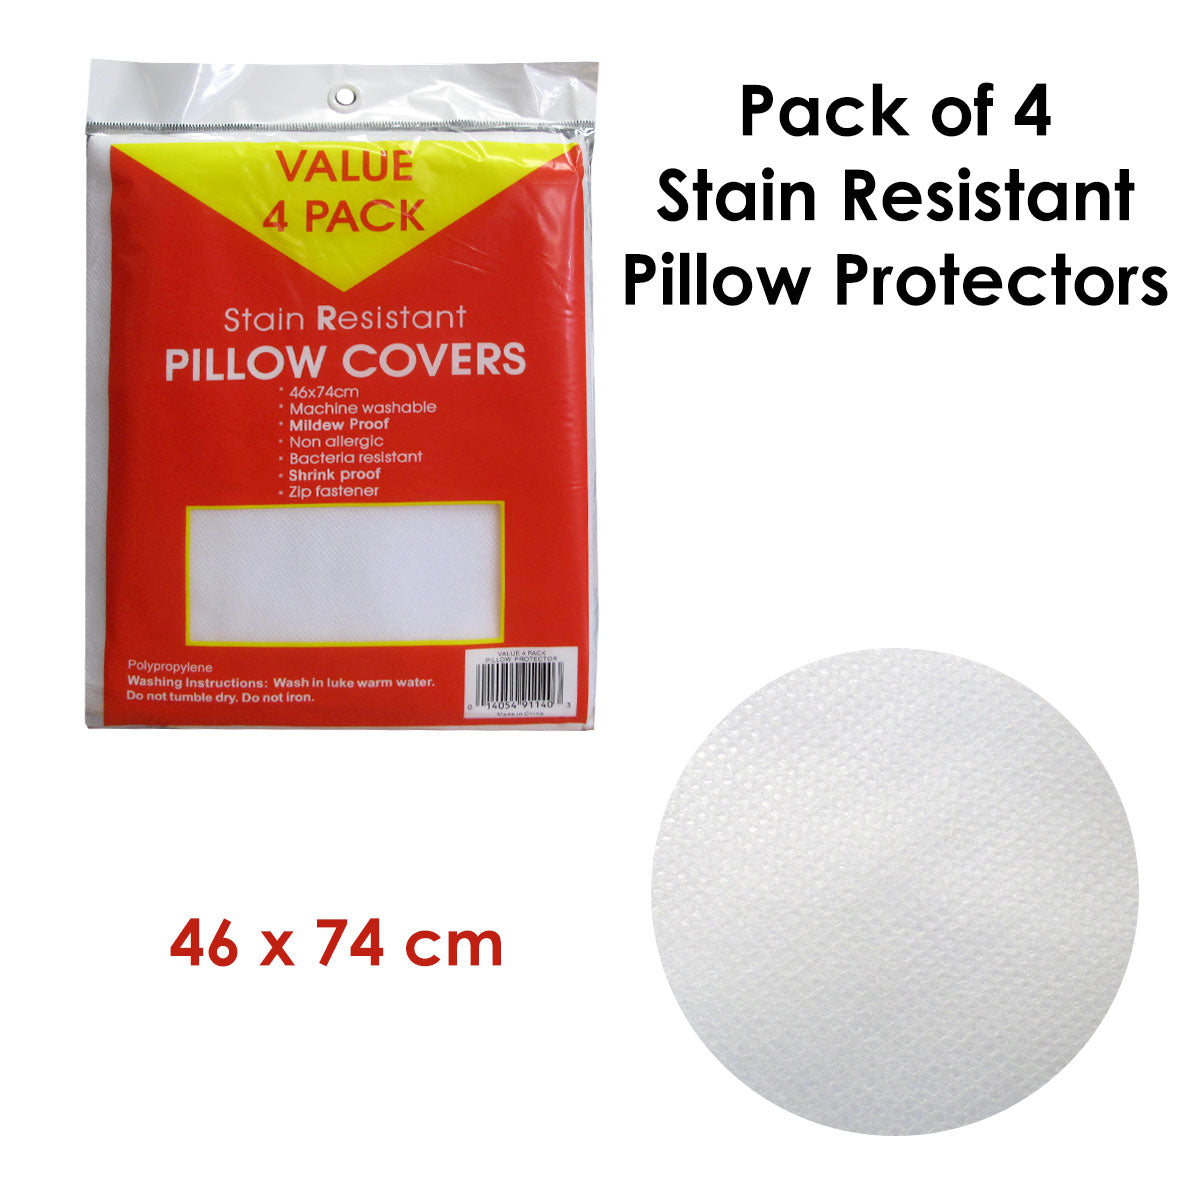 Pack of 4 Stain Resistant Pillow Protectors